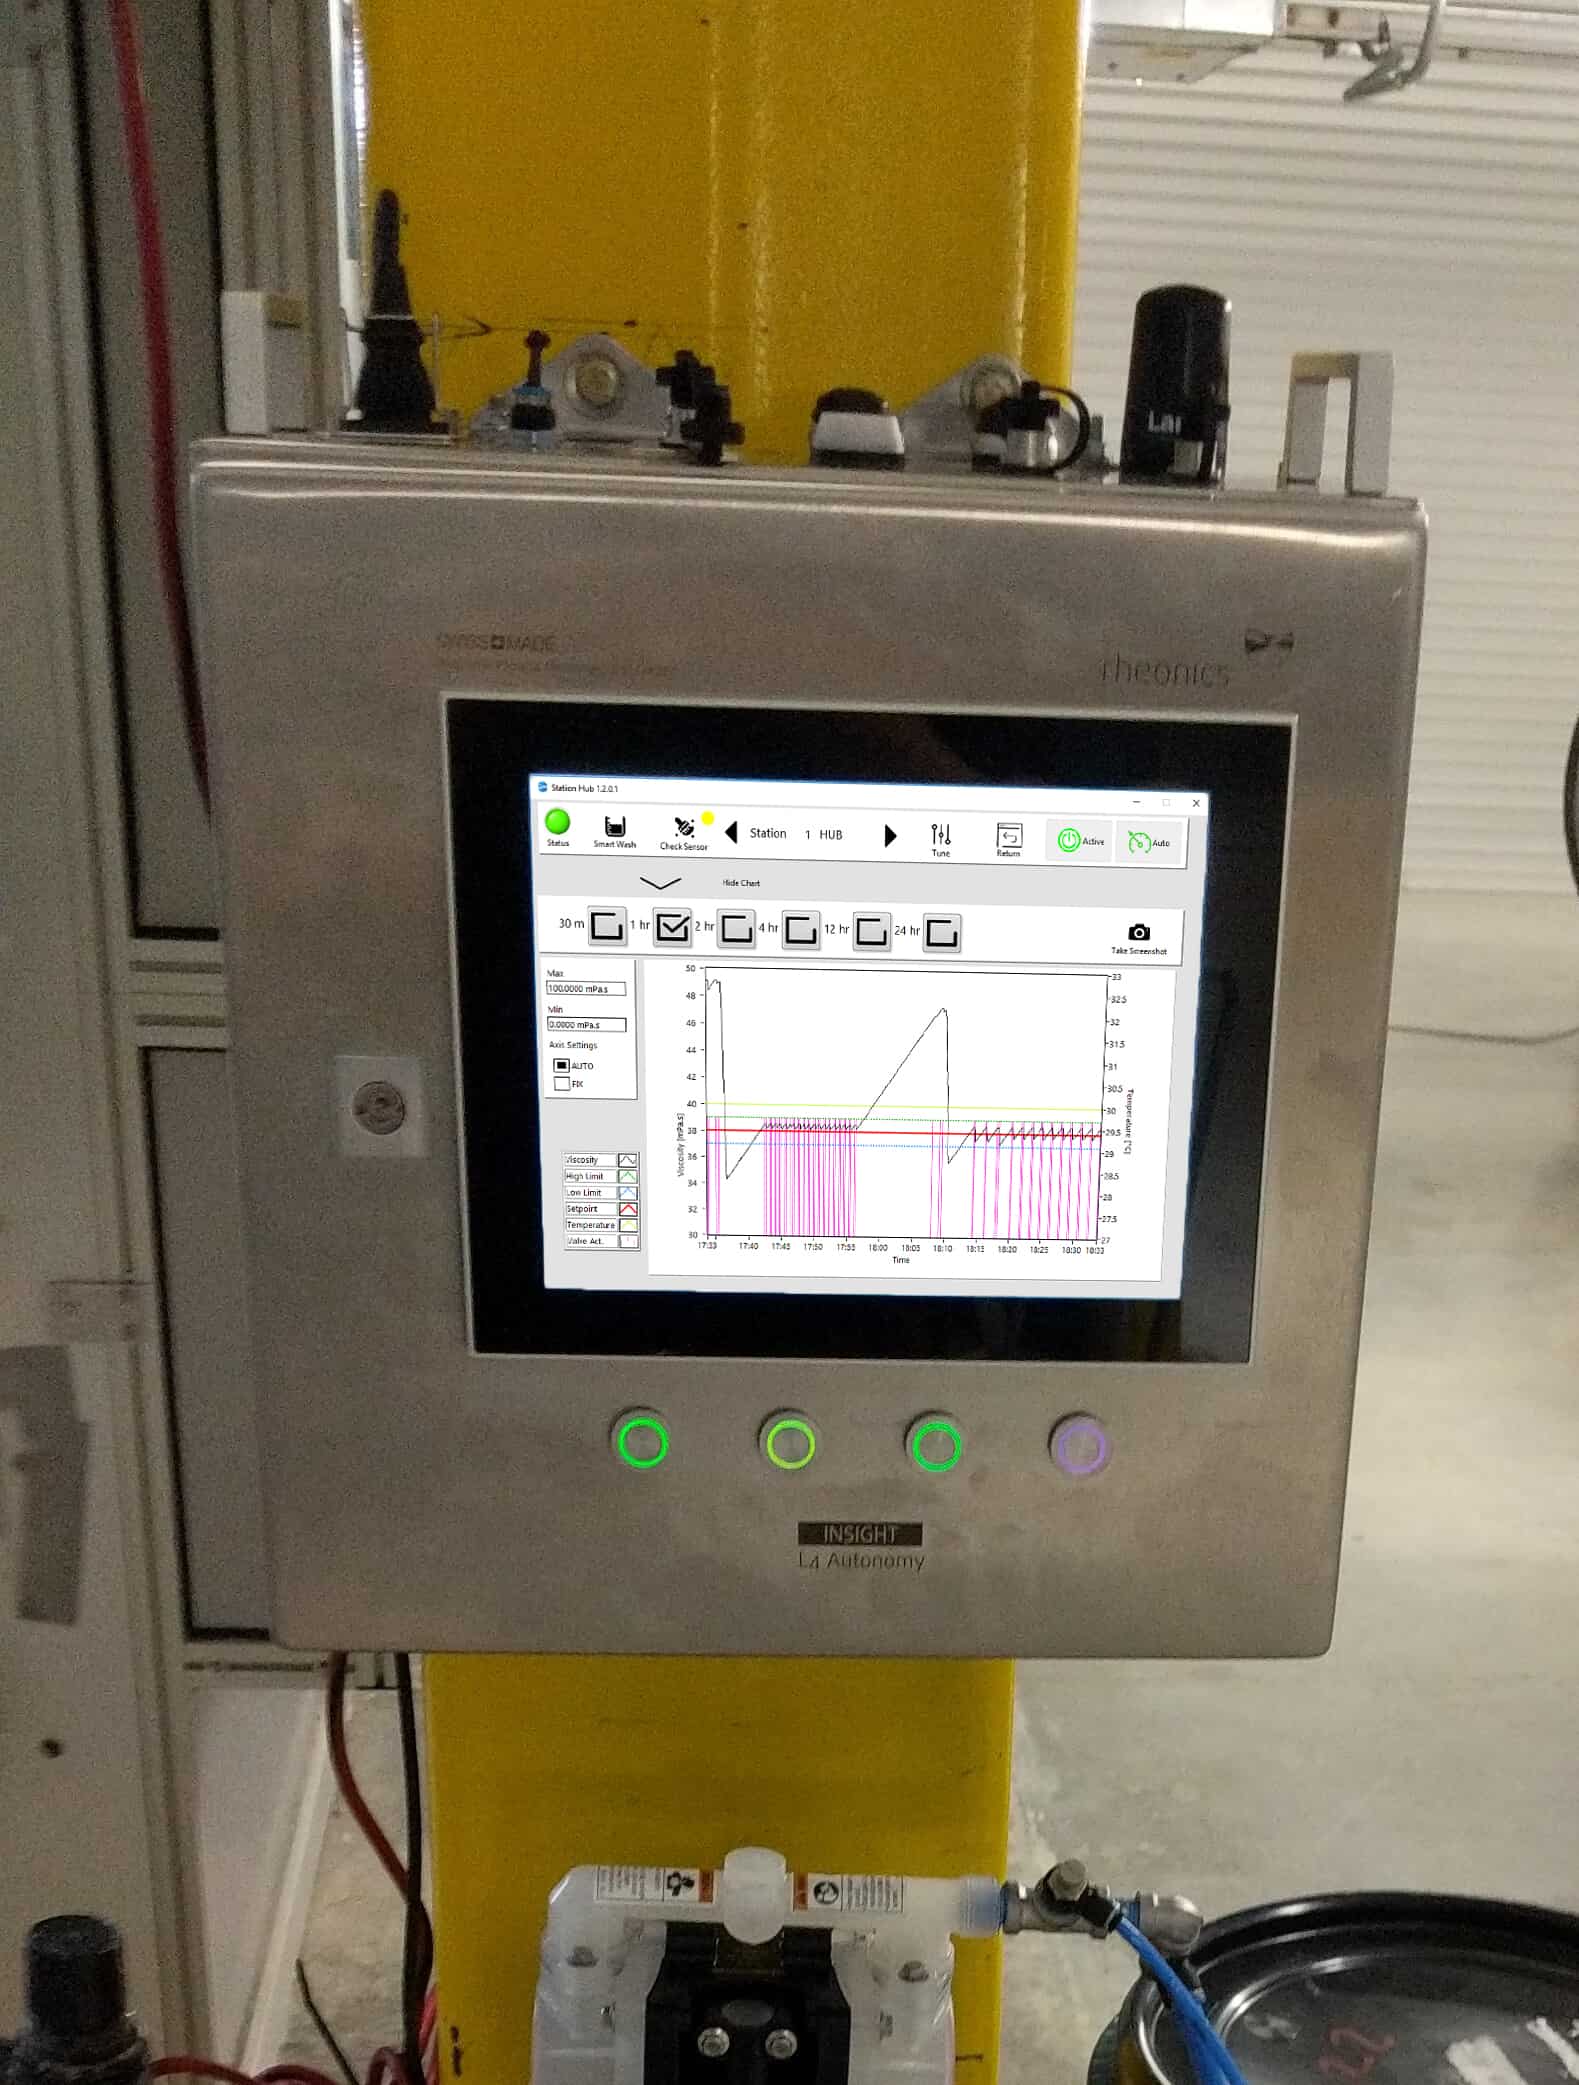 Rheonics Slurry Monitoring and Control System installed in factory